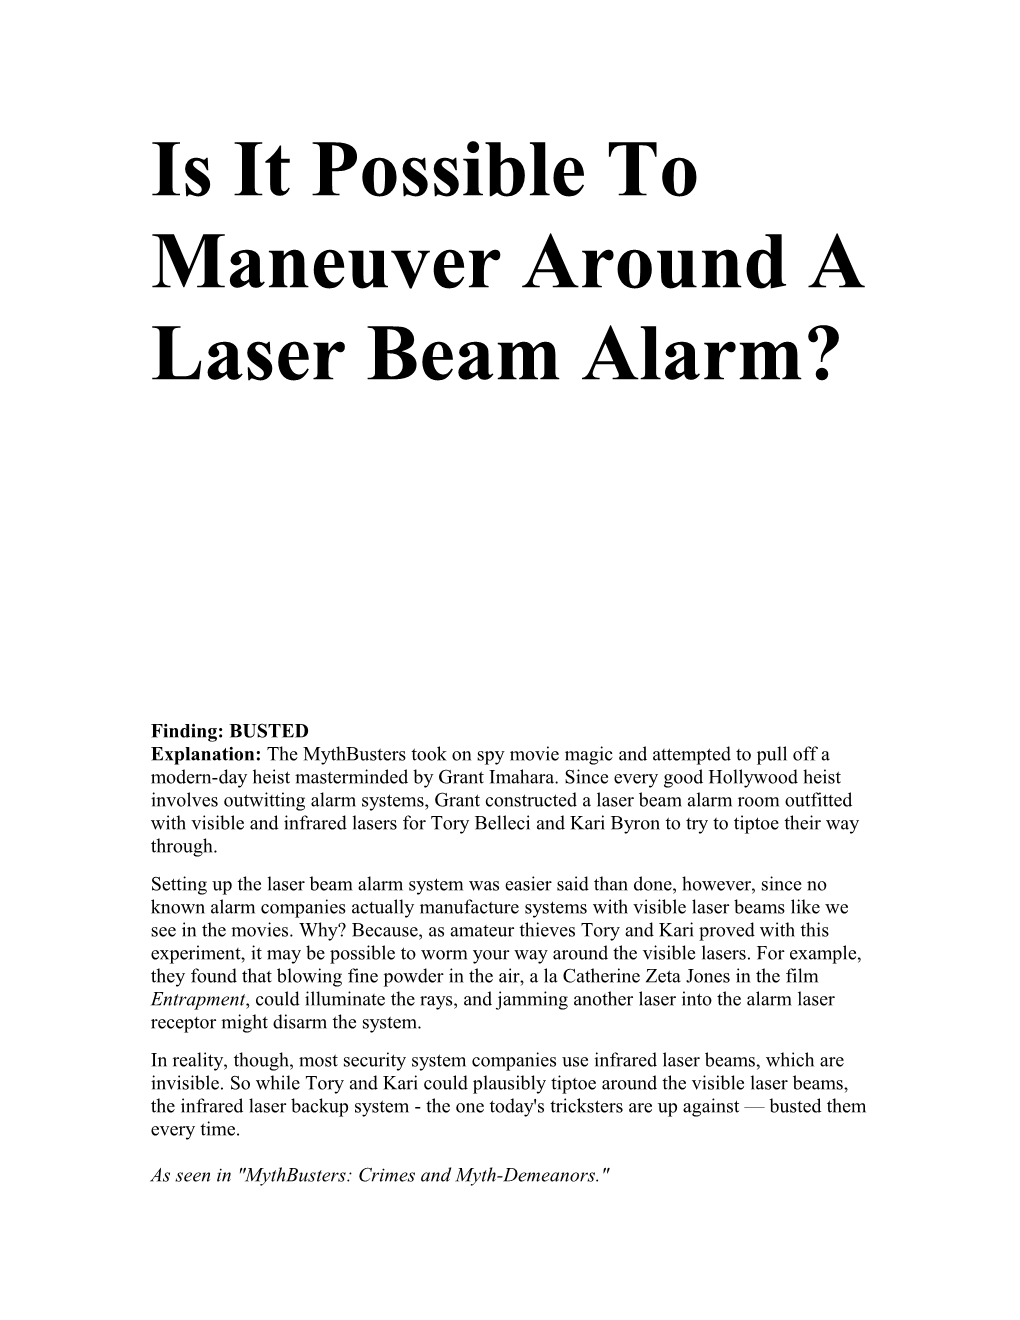 Is It Possible to Maneuver Around a Laser Beam Alarm?